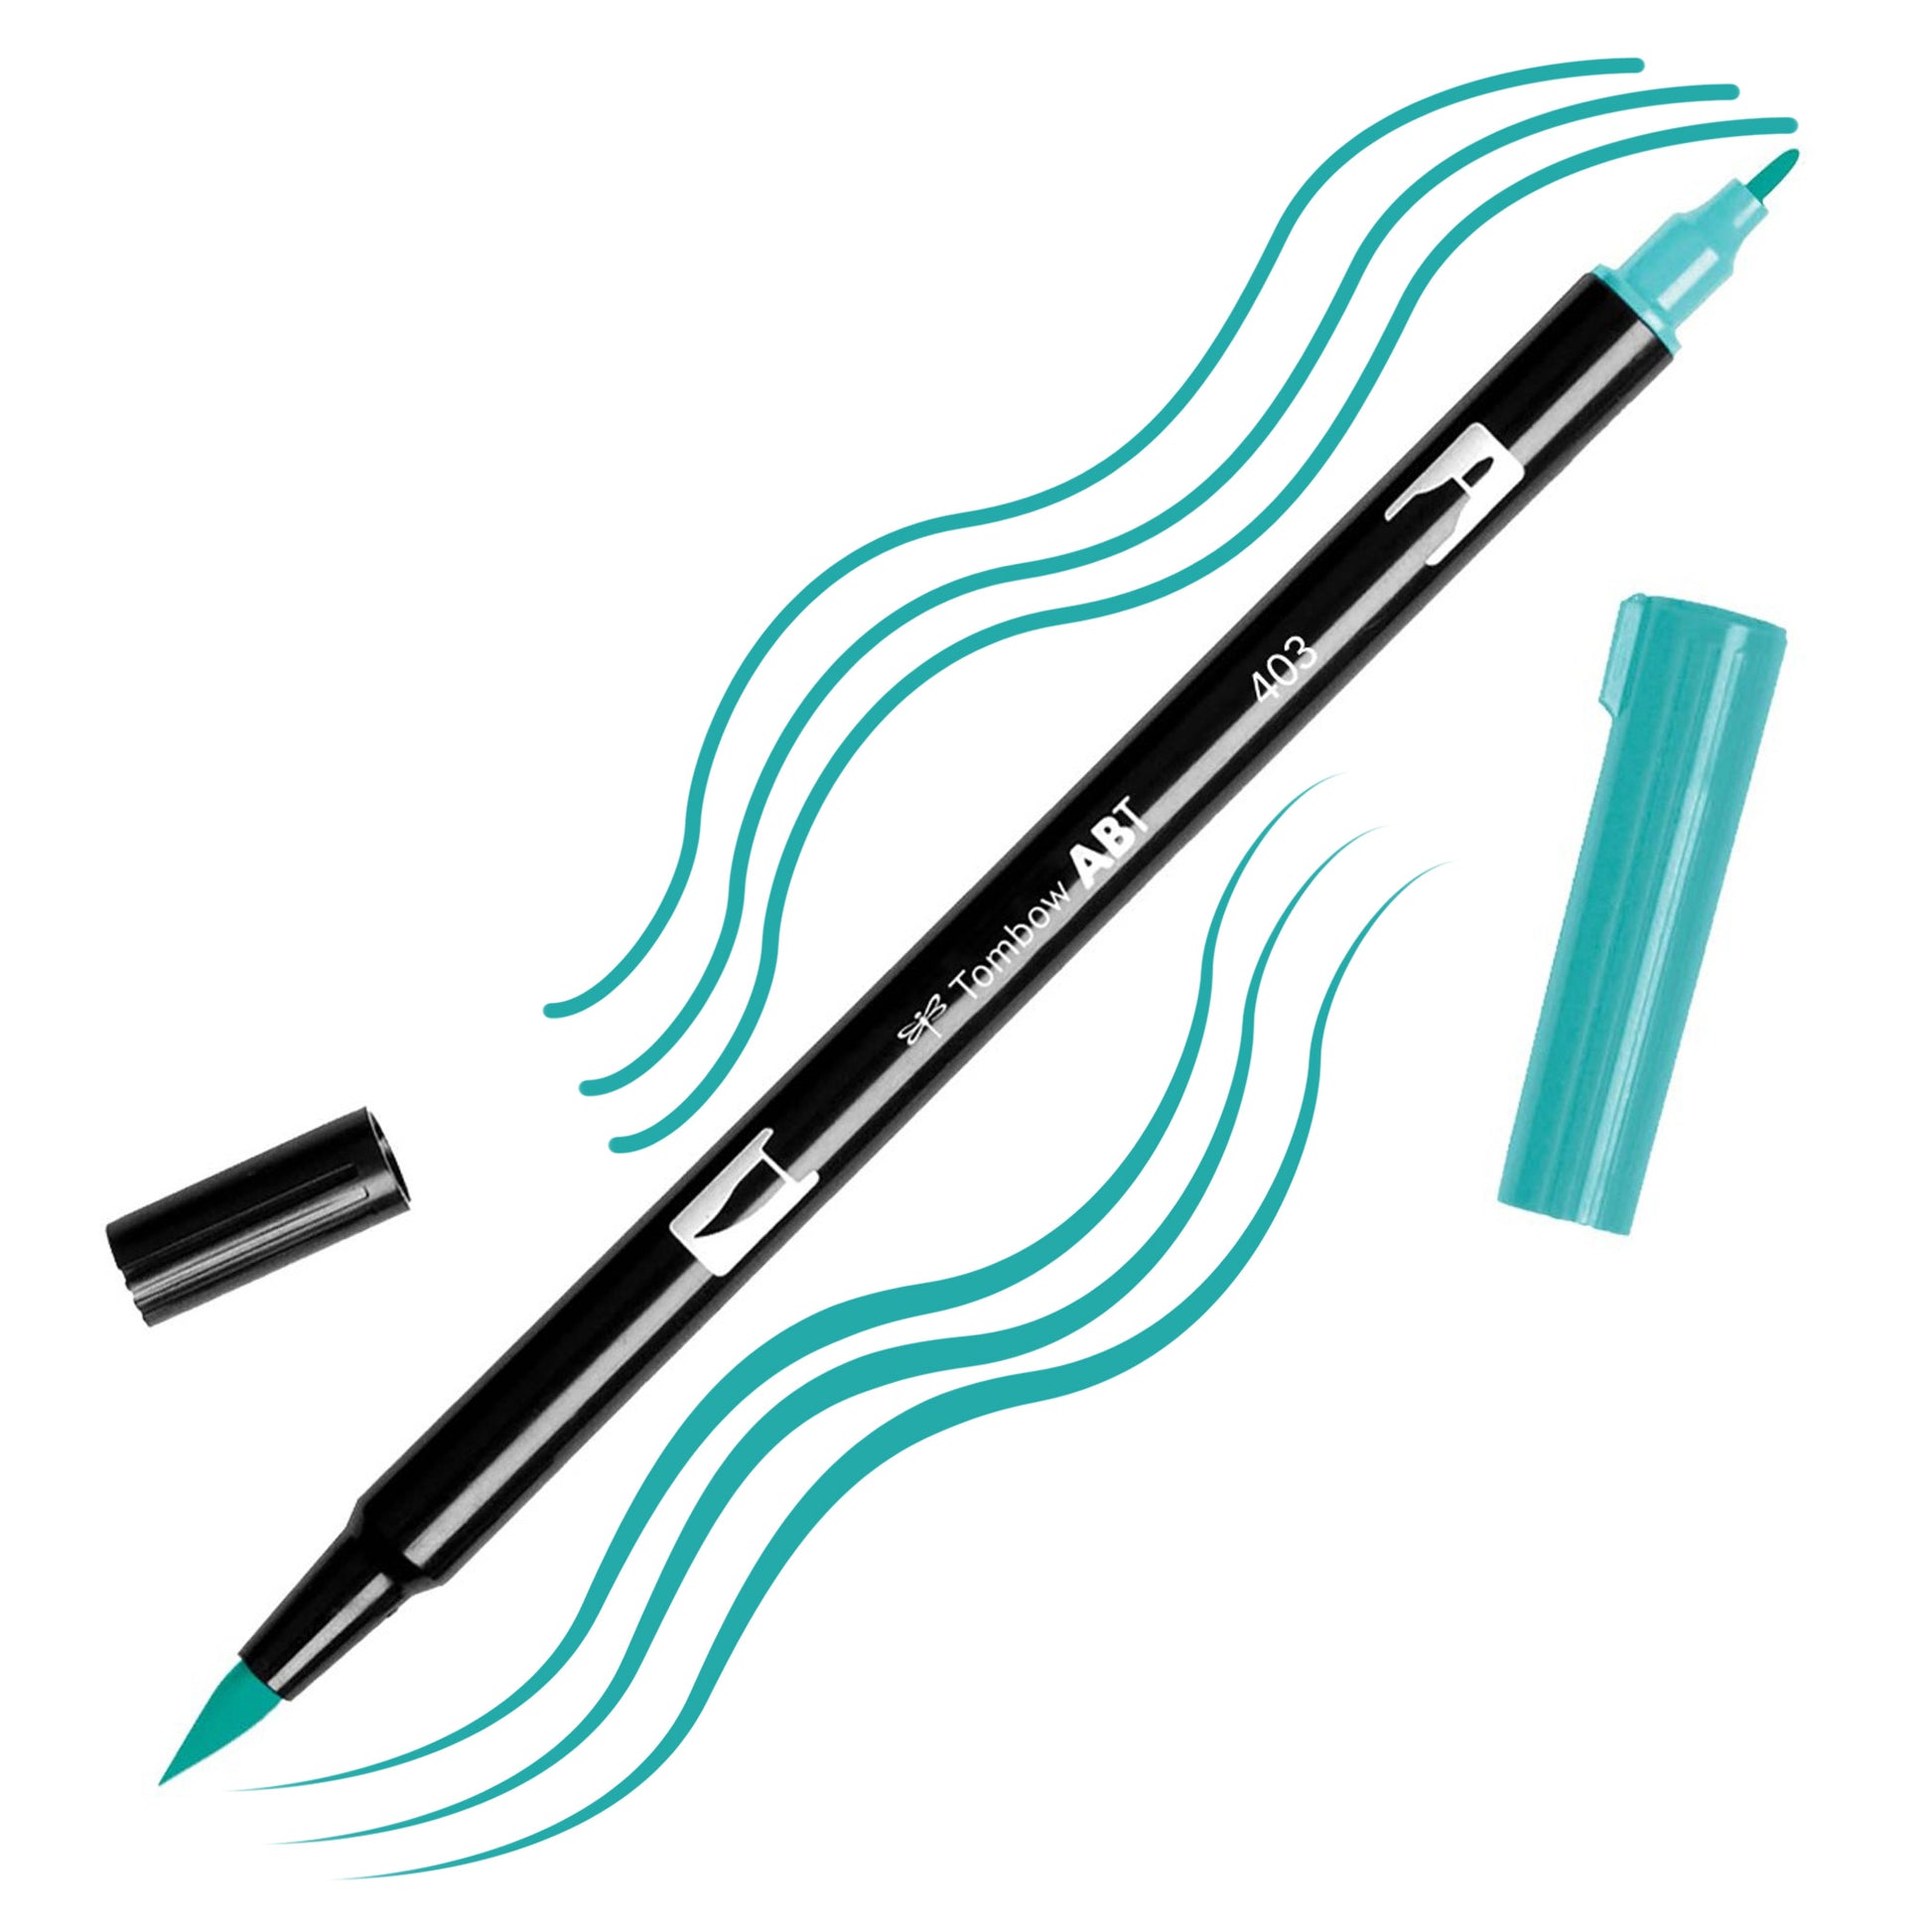 Bright Blue Tombow double-headed brush-pen with a flexible nylon fiber brush tip and a fine tip against a white background with Bright Blue strokes